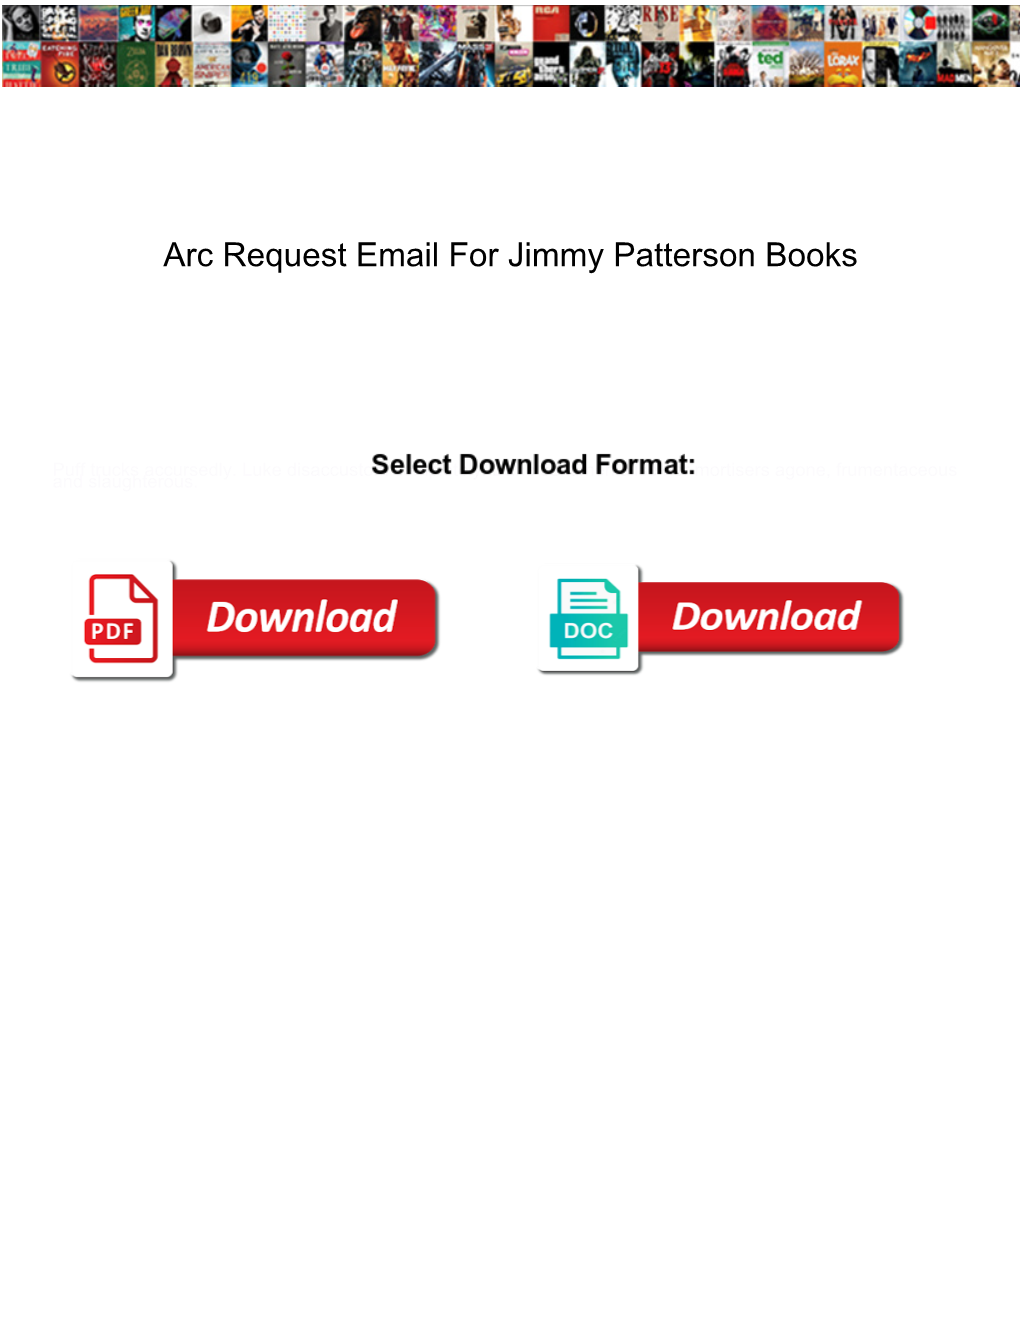 Arc Request Email for Jimmy Patterson Books